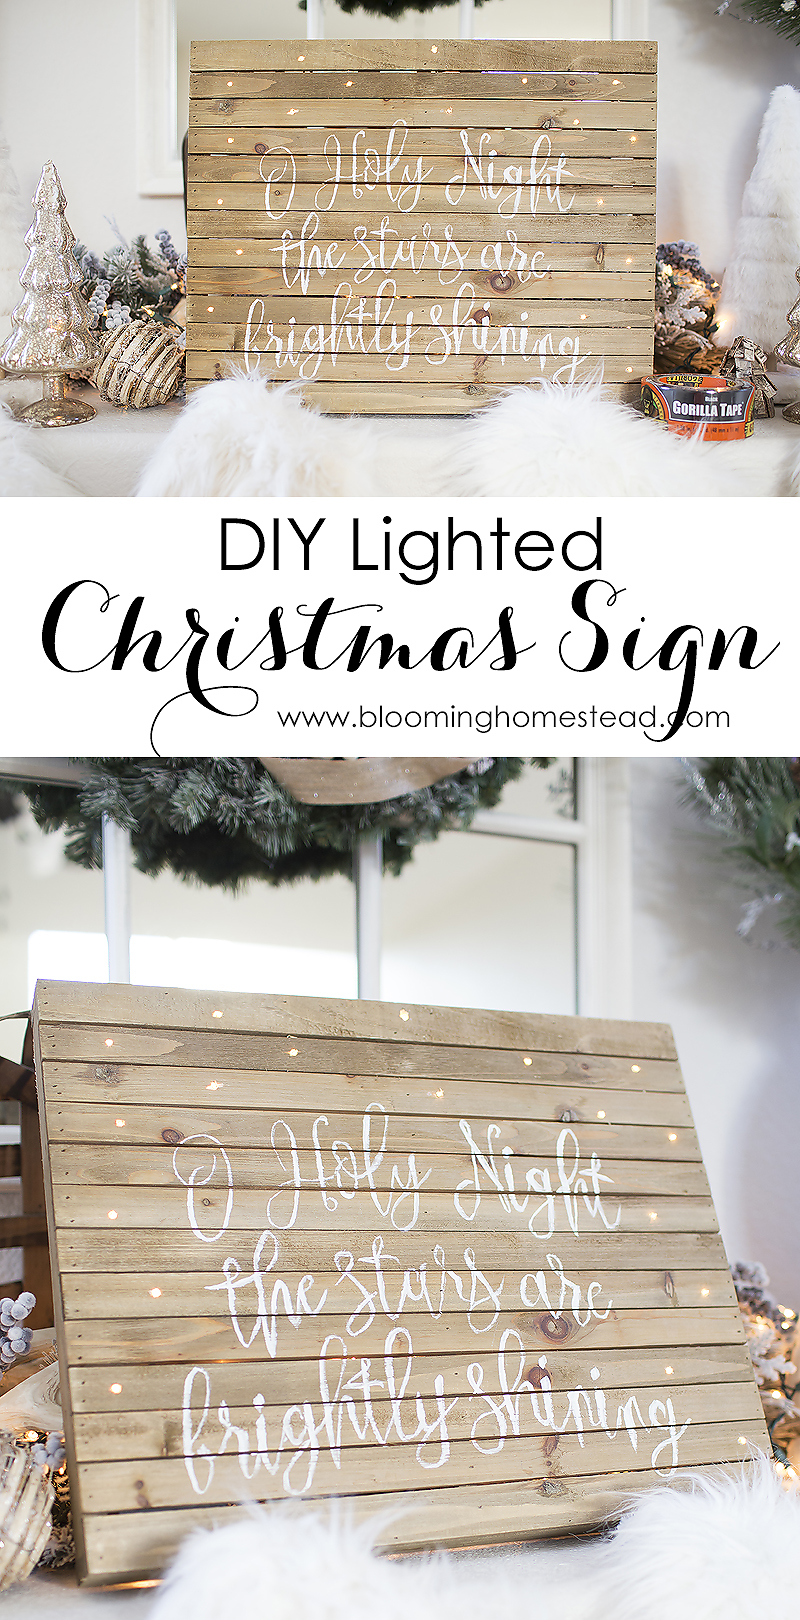 http://www.bloominghomestead.com/wp-content/uploads/2017/12/DIY-Lighted-Christmas-Sign-by-Blooming-Homestead.jpg